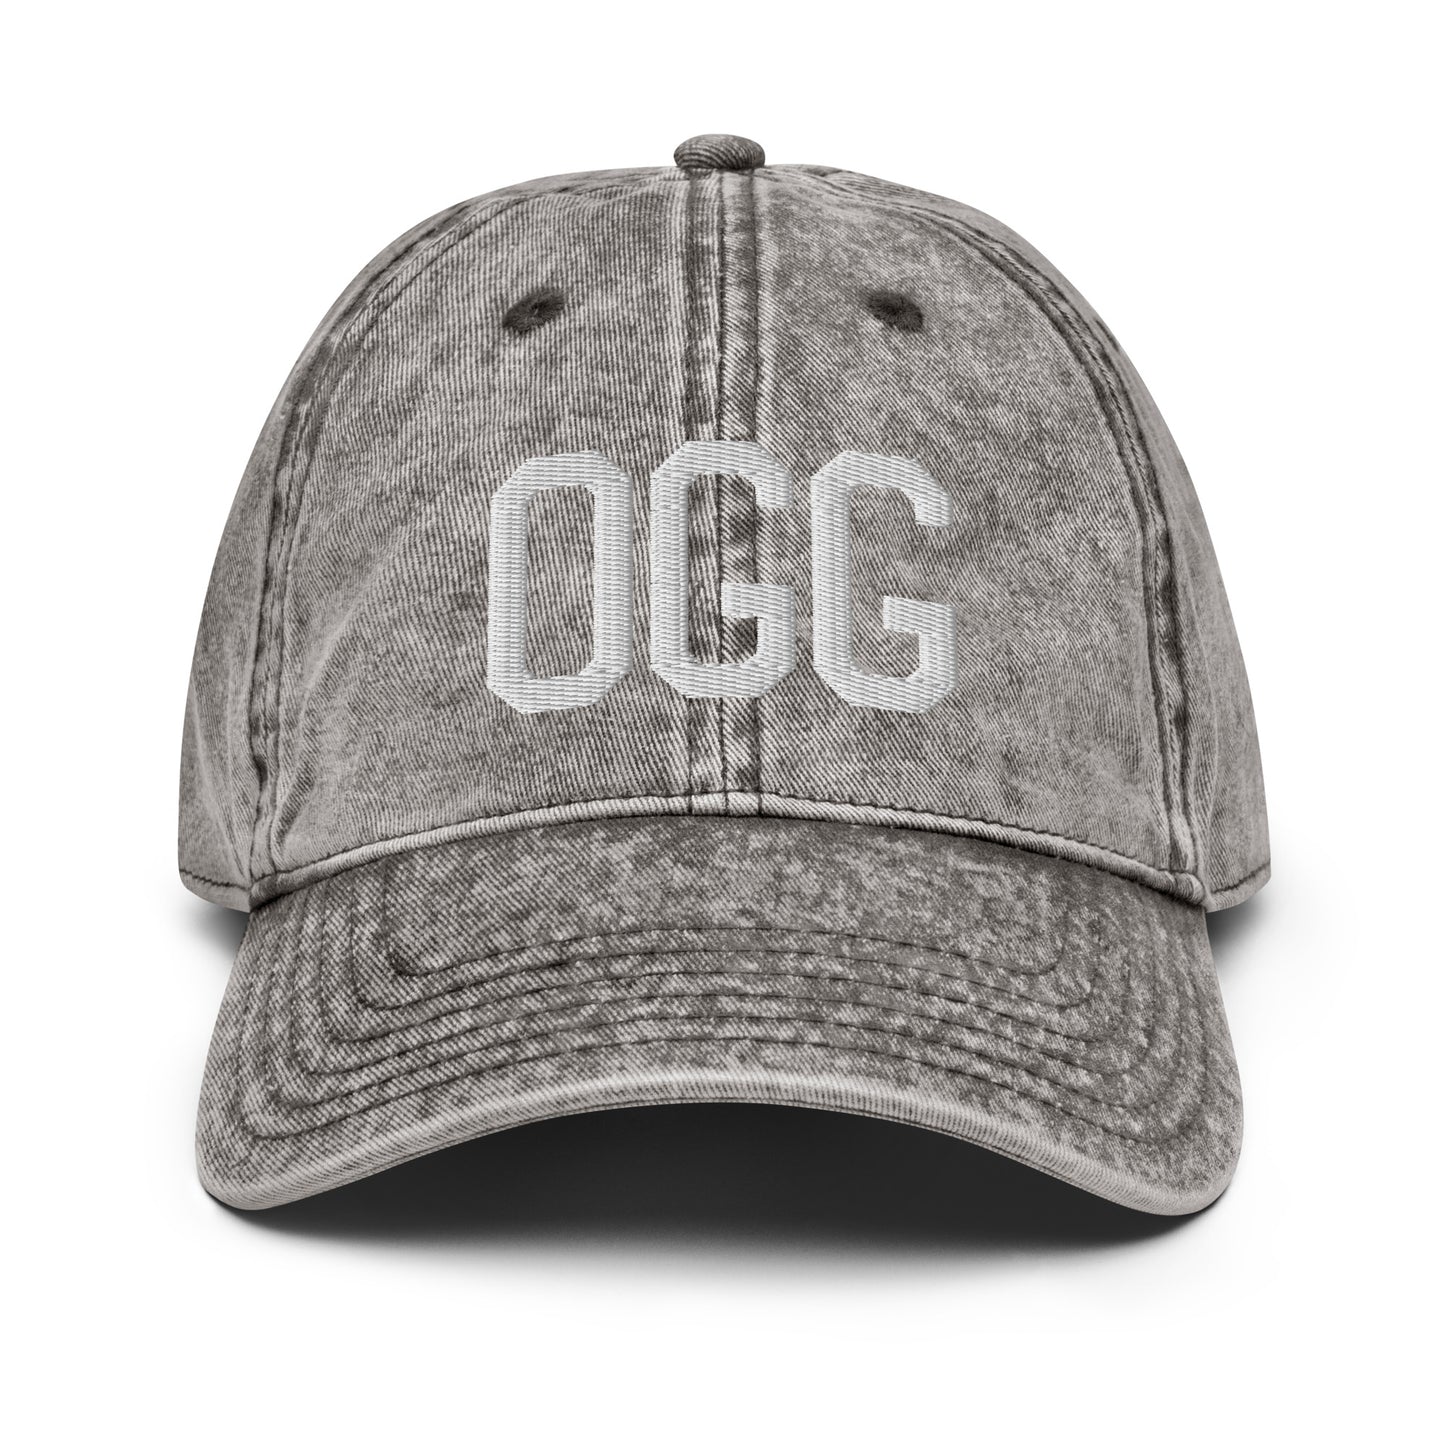 Airport Code Twill Cap - White • OGG Maui • YHM Designs - Image 28